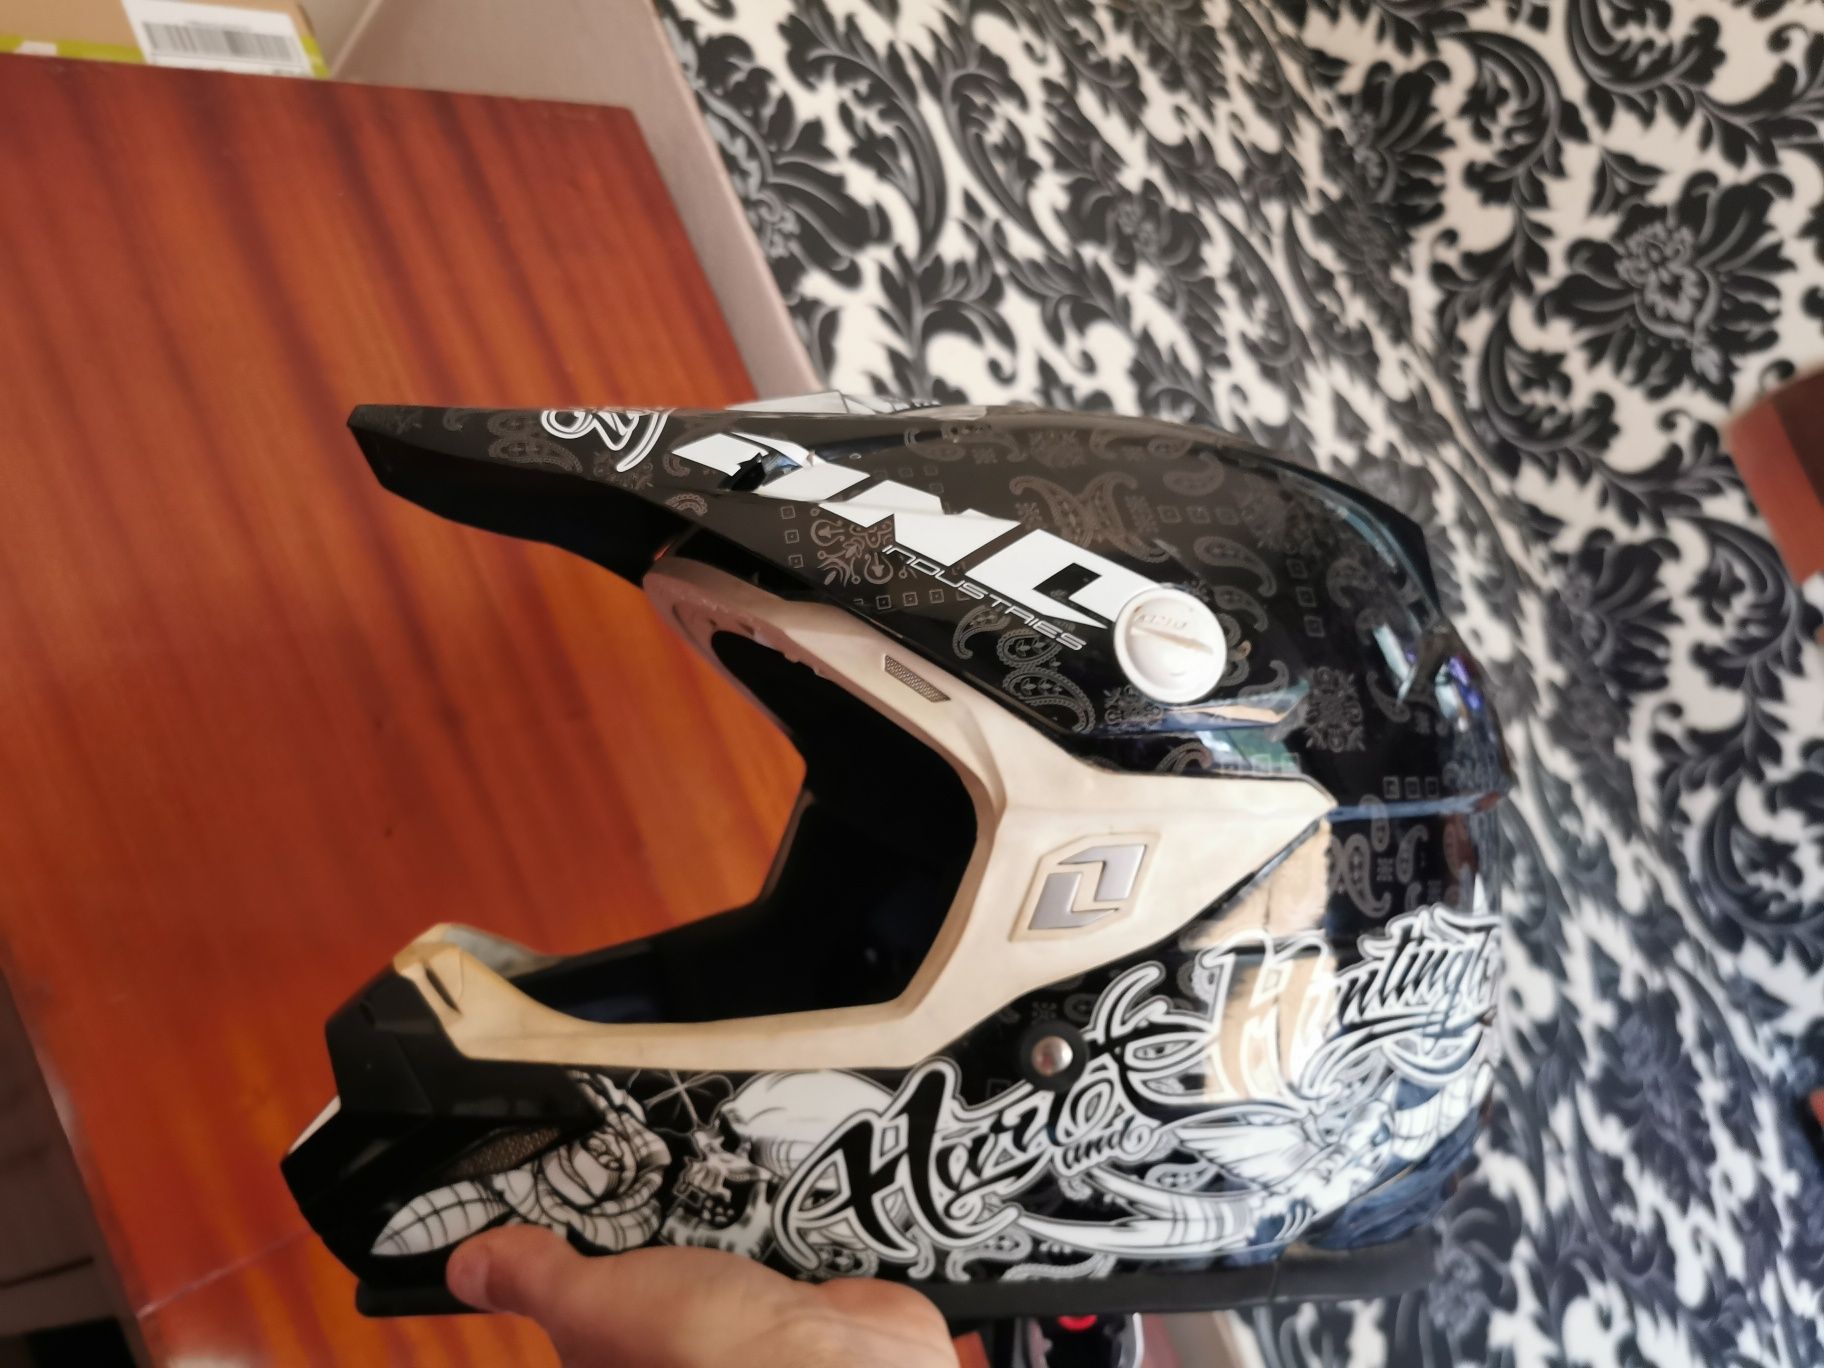 Capacete One industries Trooper 2 Carey Hart. Limited edition